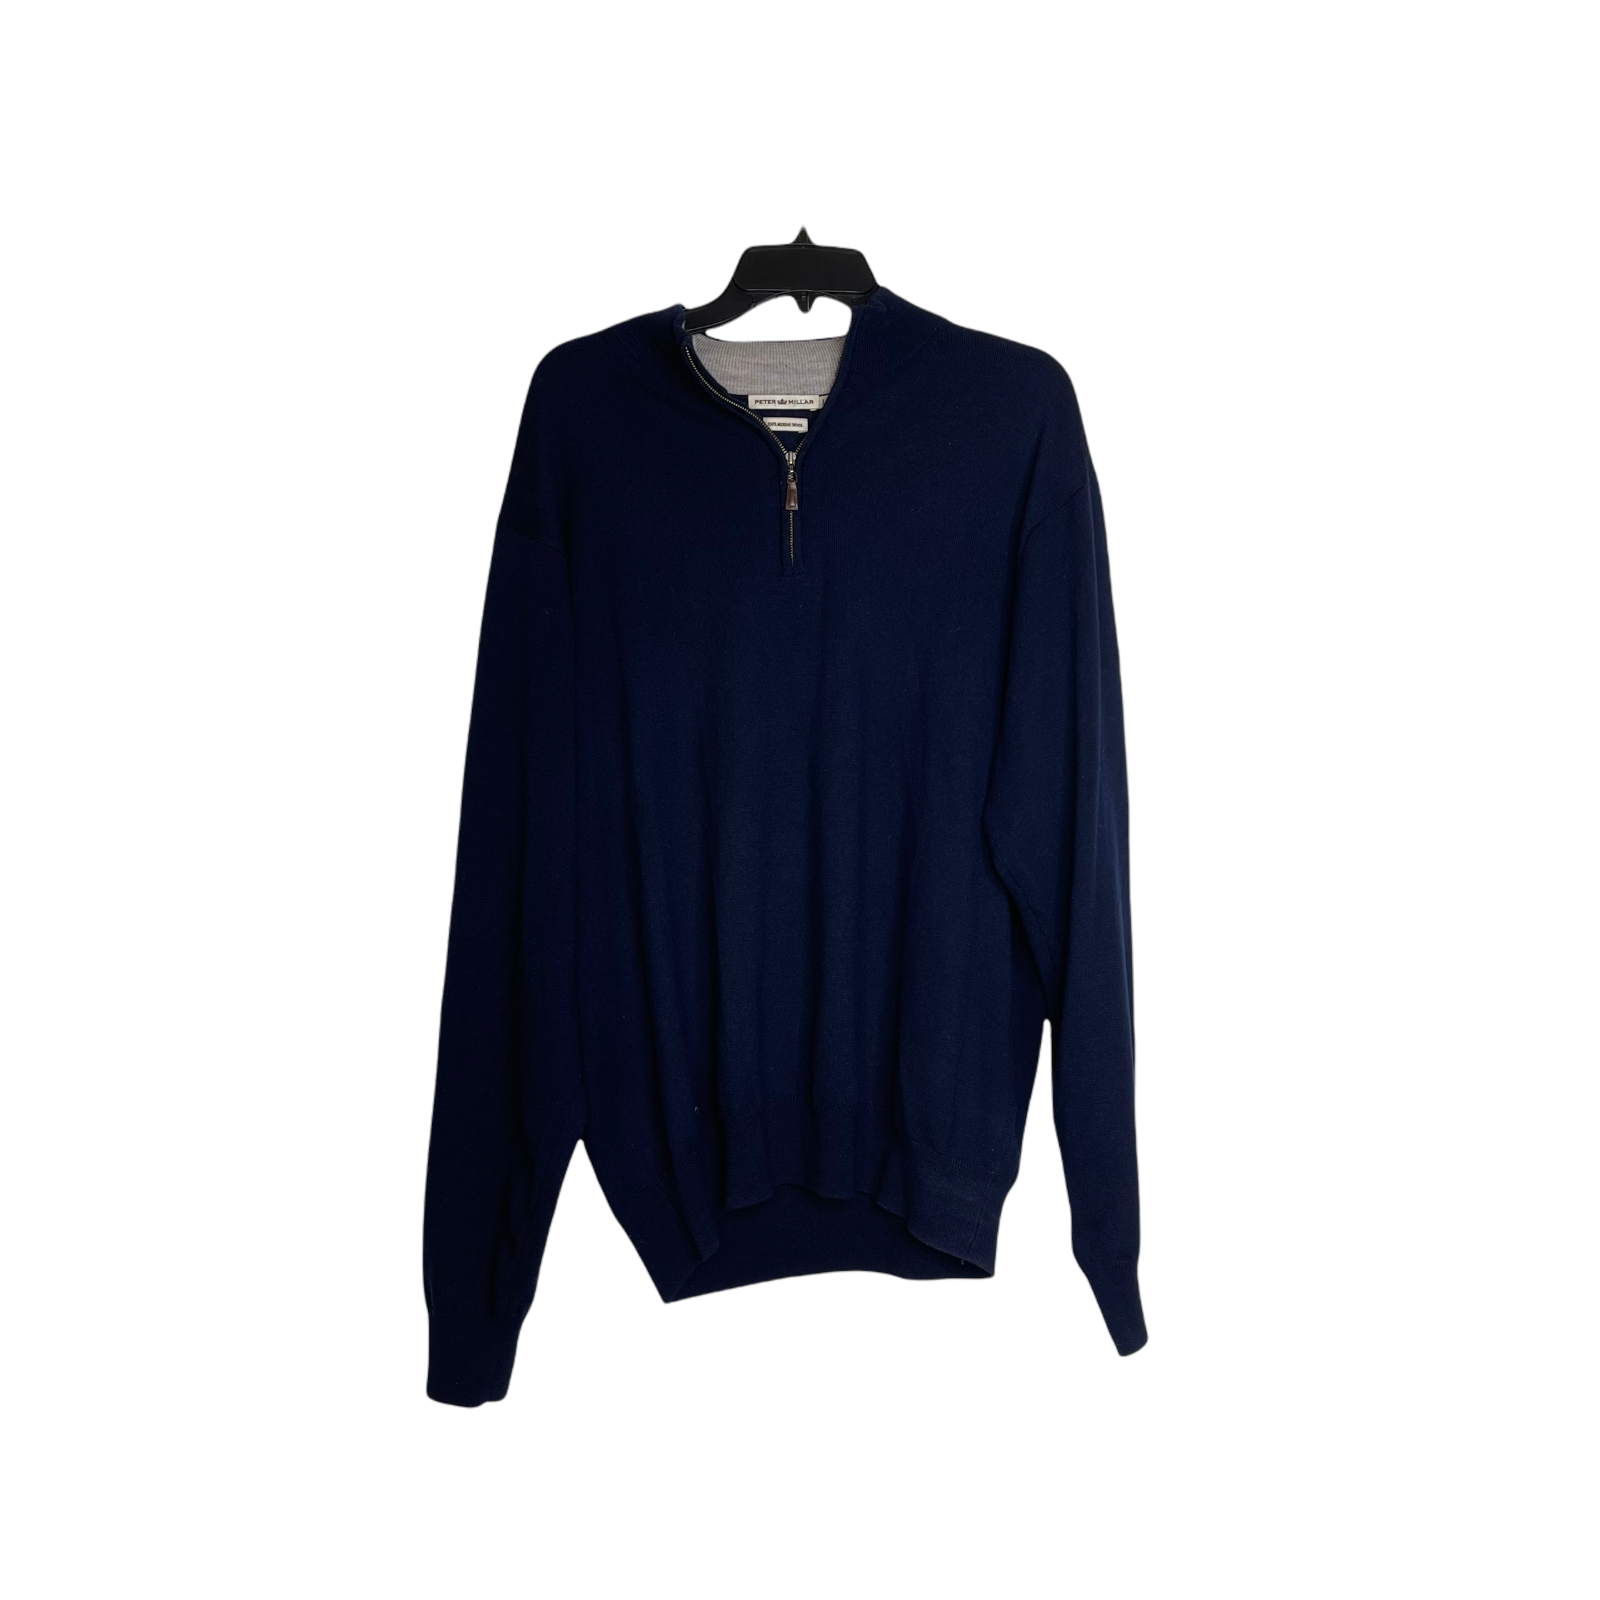 Primary image for Peter Millar 1/4 Zip Pullover Sweater Size Large Navy Blue Merino Wool Logo Mens